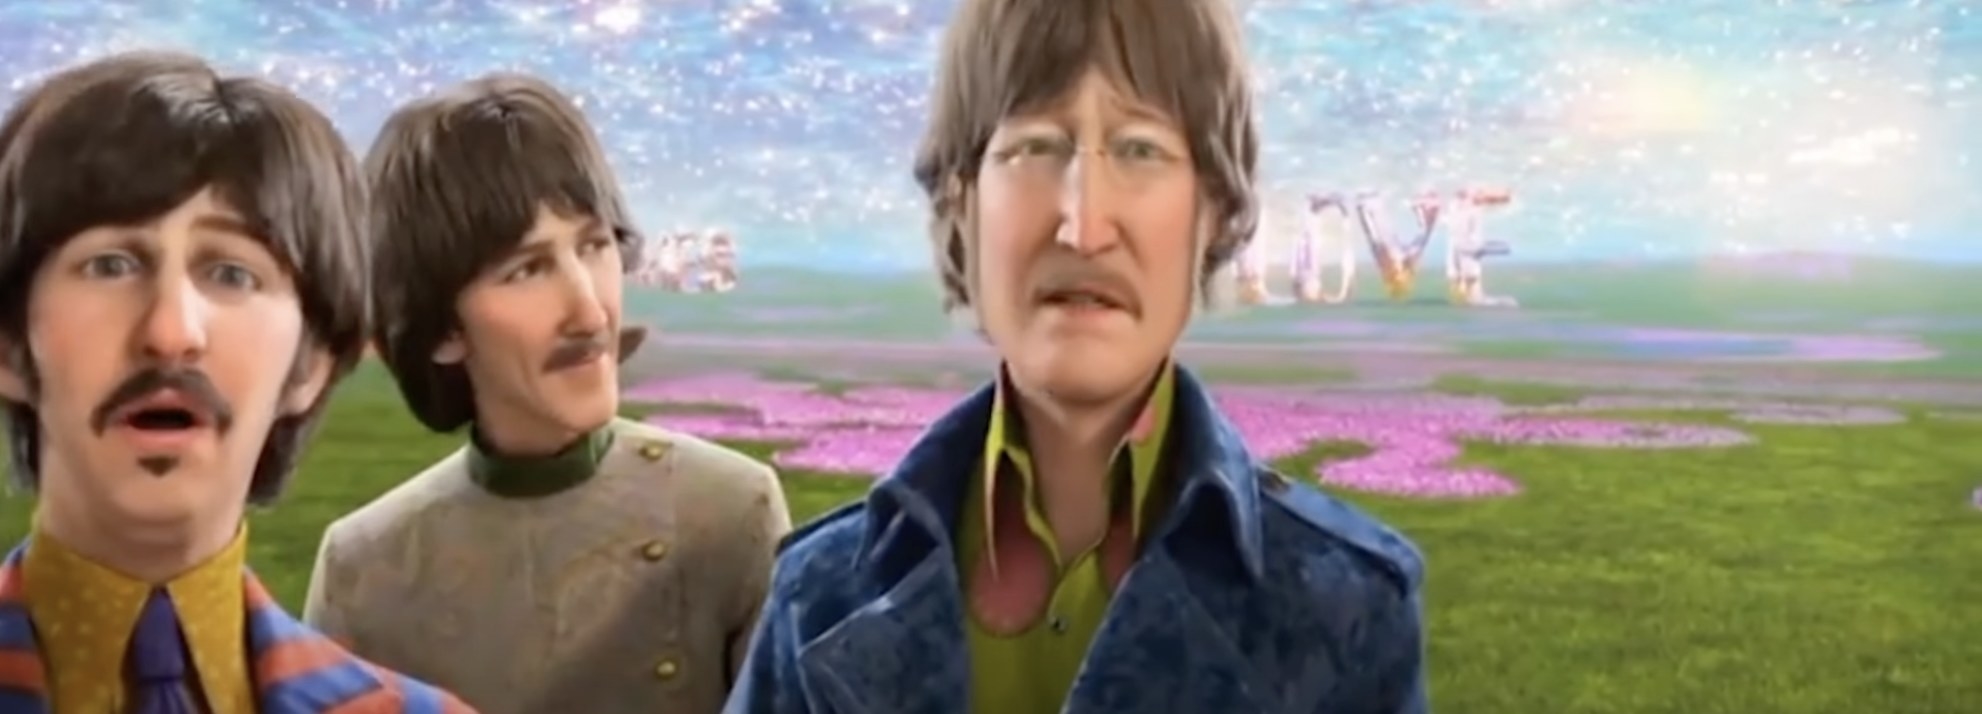 animated version of &quot;The Beatles&quot; band members